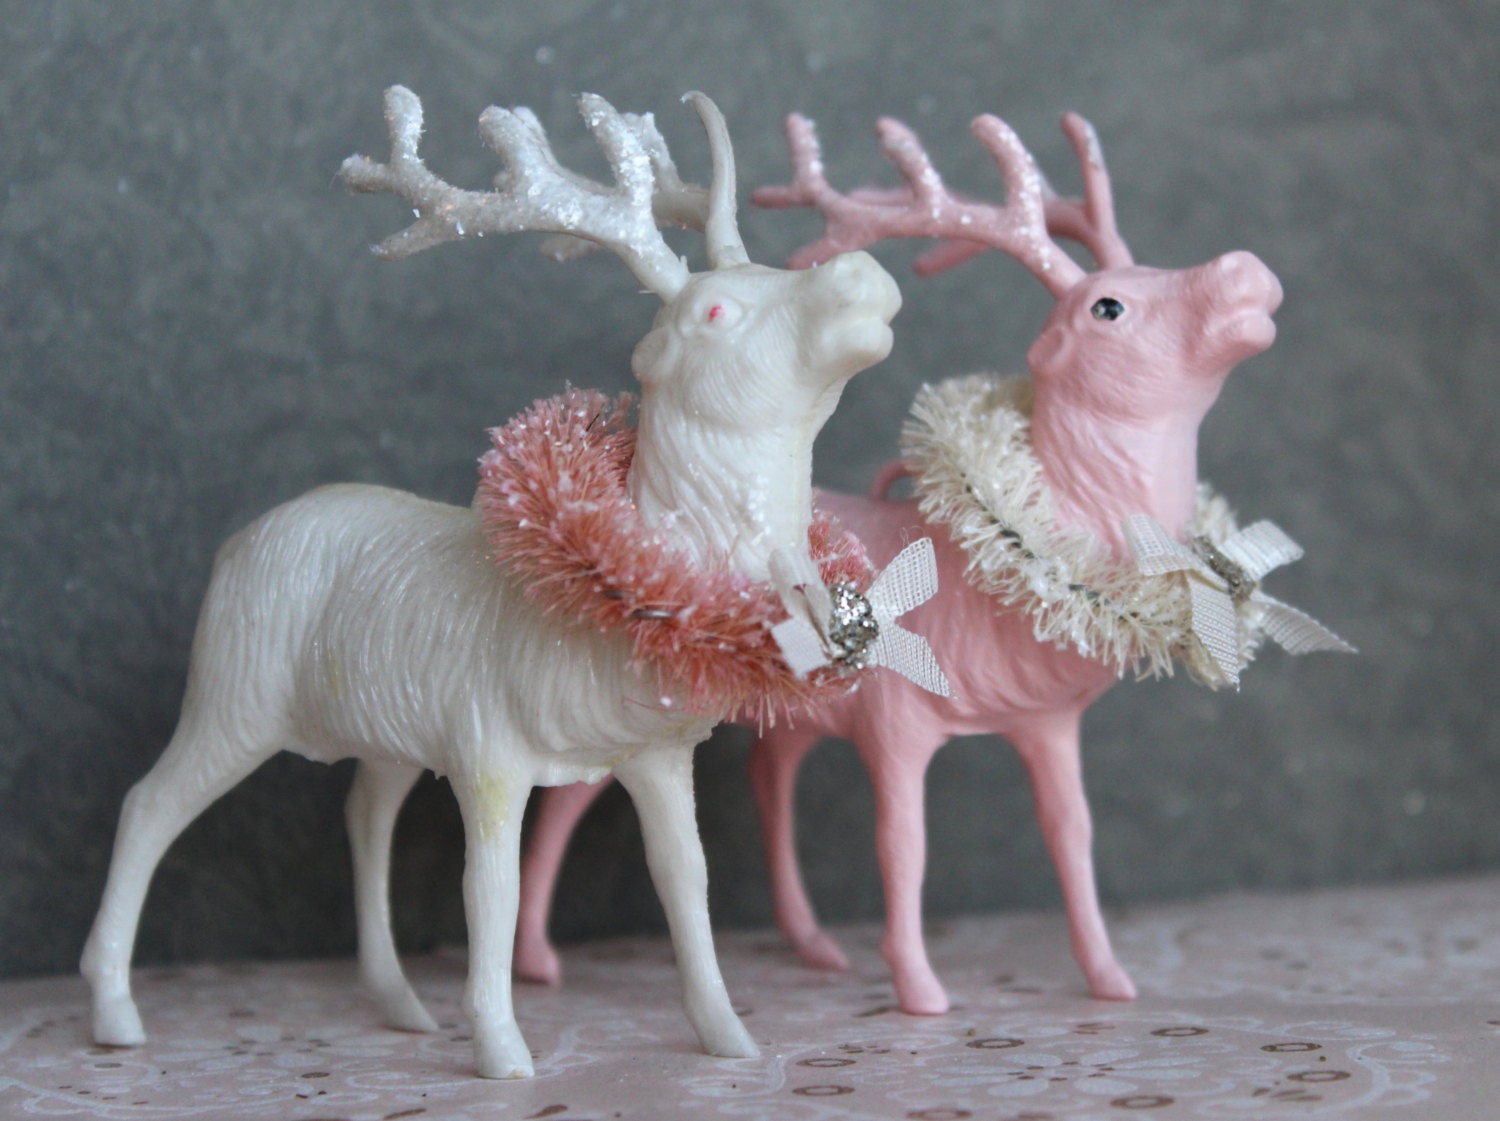 2 Pink Holiday Reindeer Decorations with Cream Wreaths - 1950s Retro Vintage Style Deer Ornament